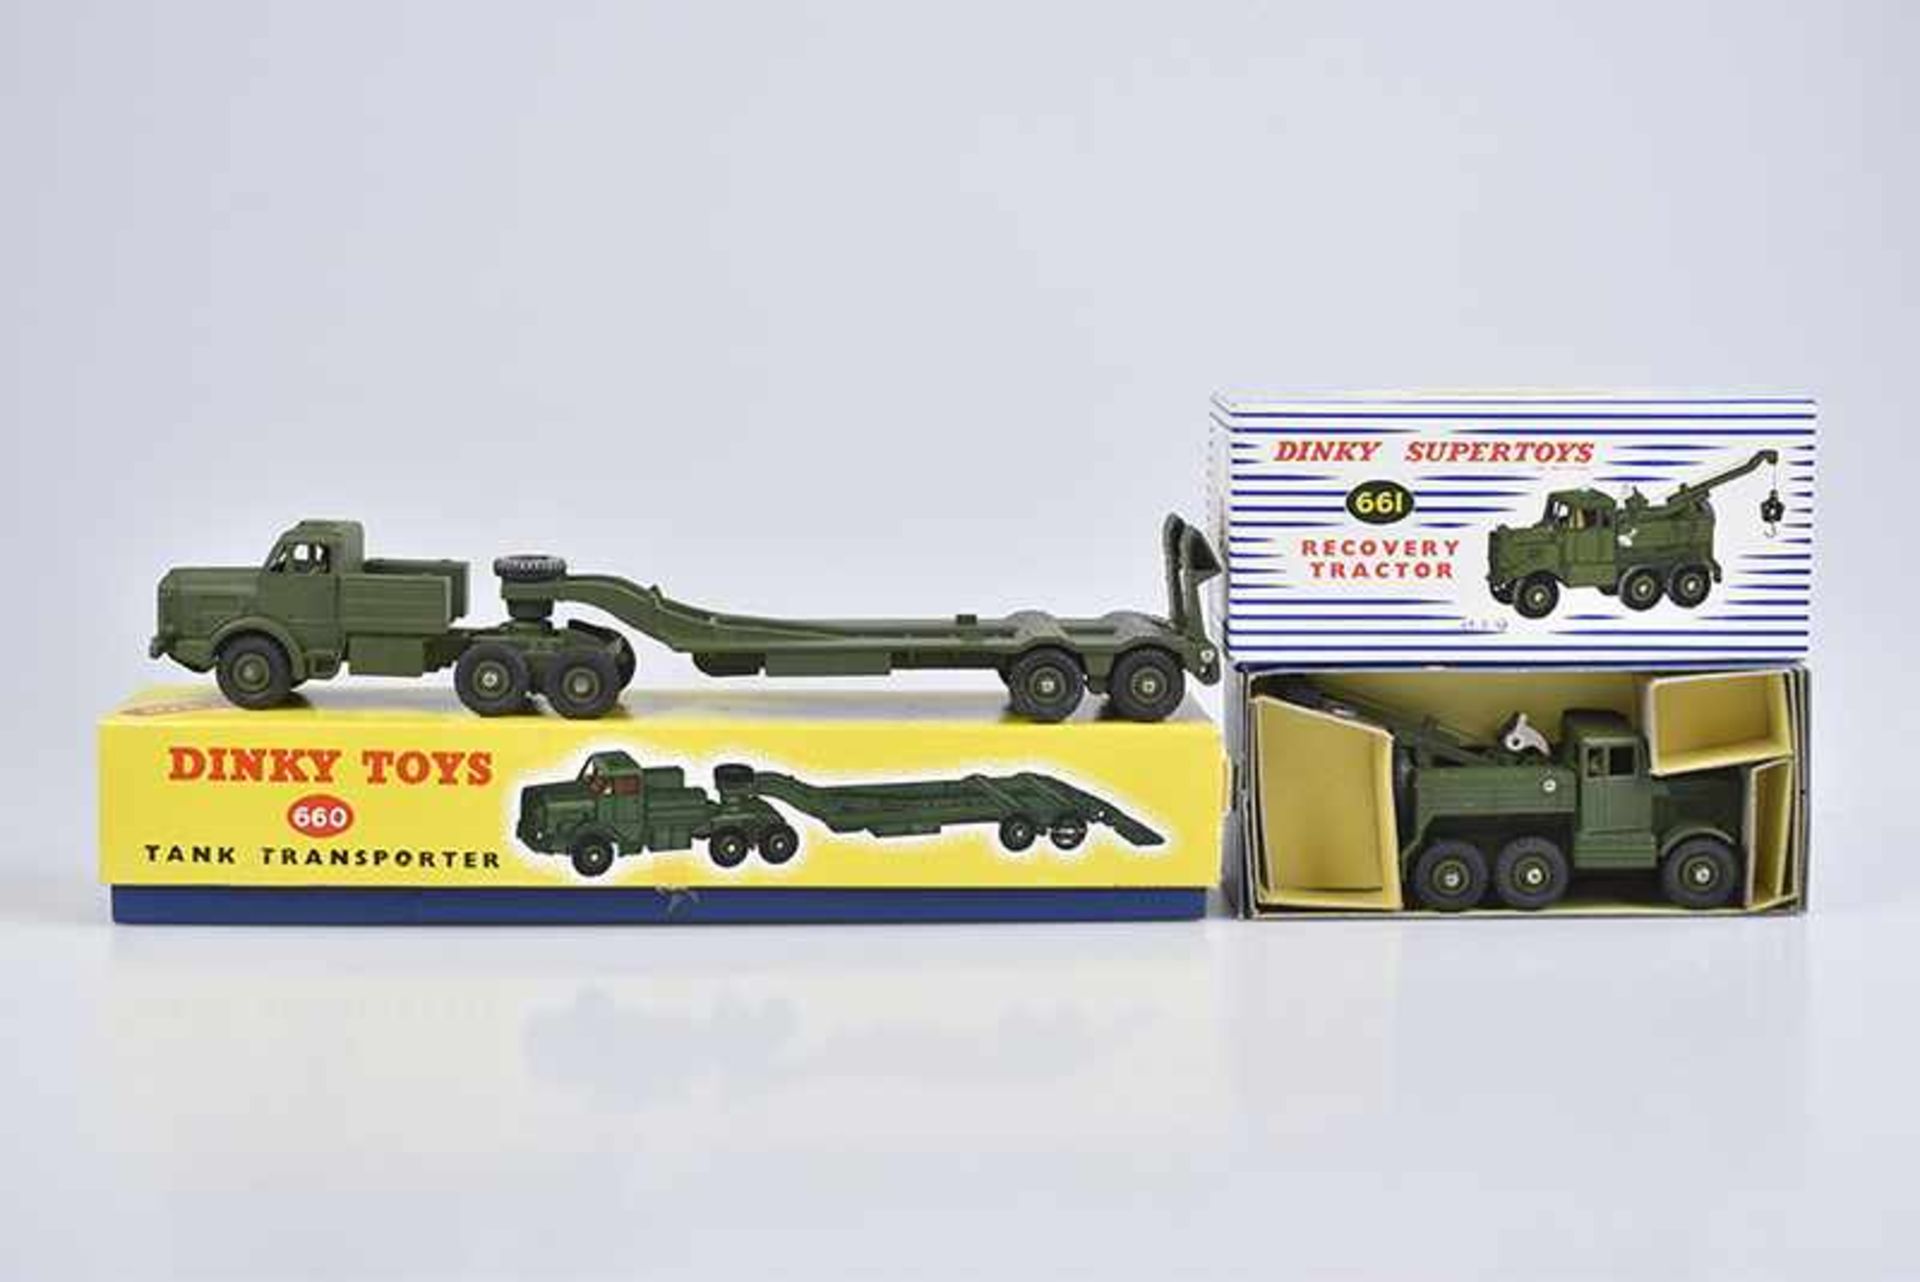 DINKY SUPERTOYS Tractor und Transporter, Made in England, Metall, M 1:43, 50er Jahre, Recovery